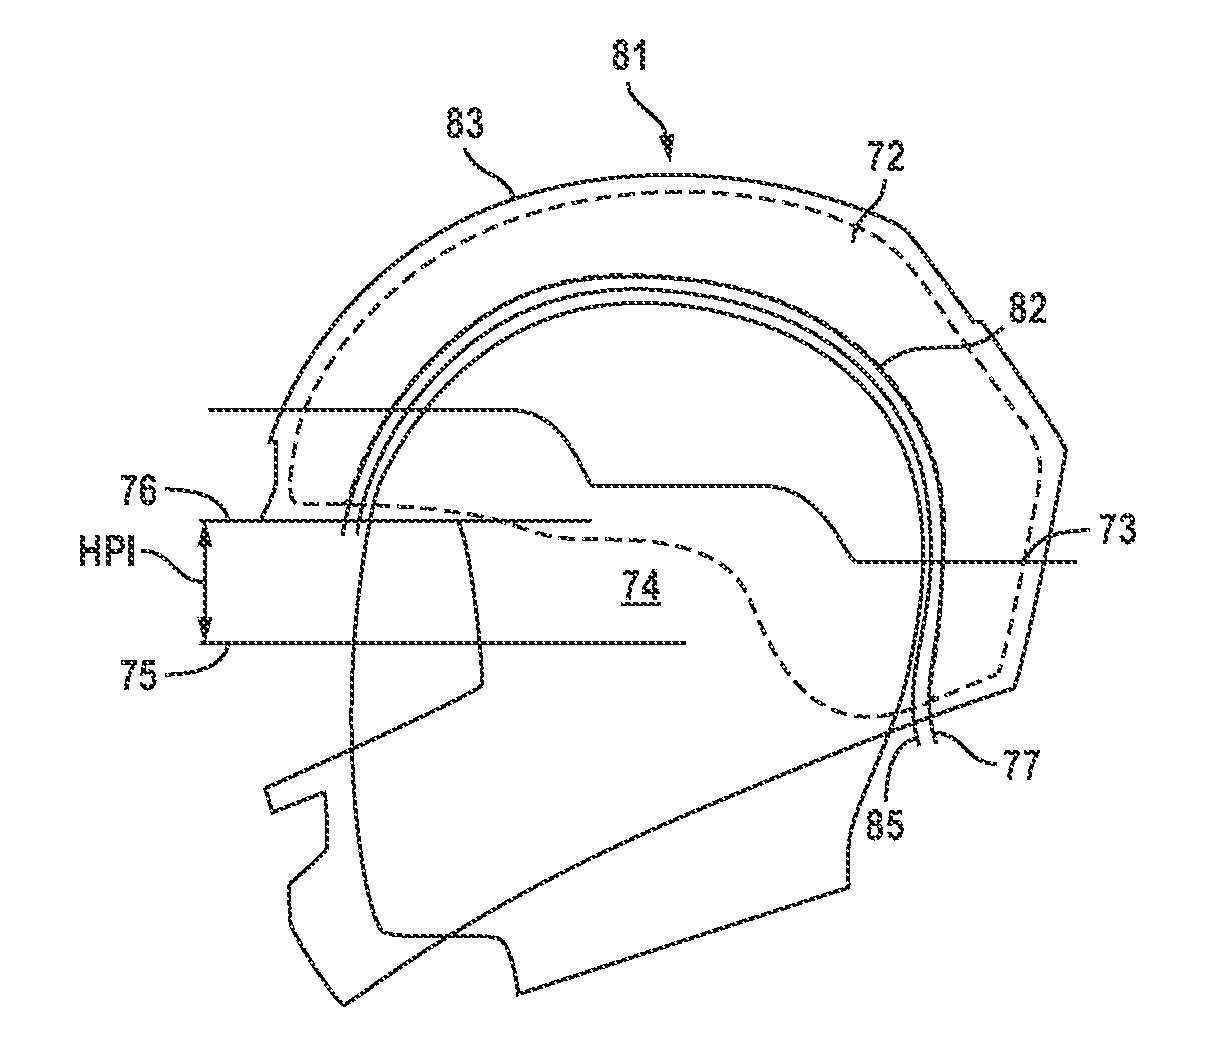 System and method for custom forming a protective helmet for a customer's head